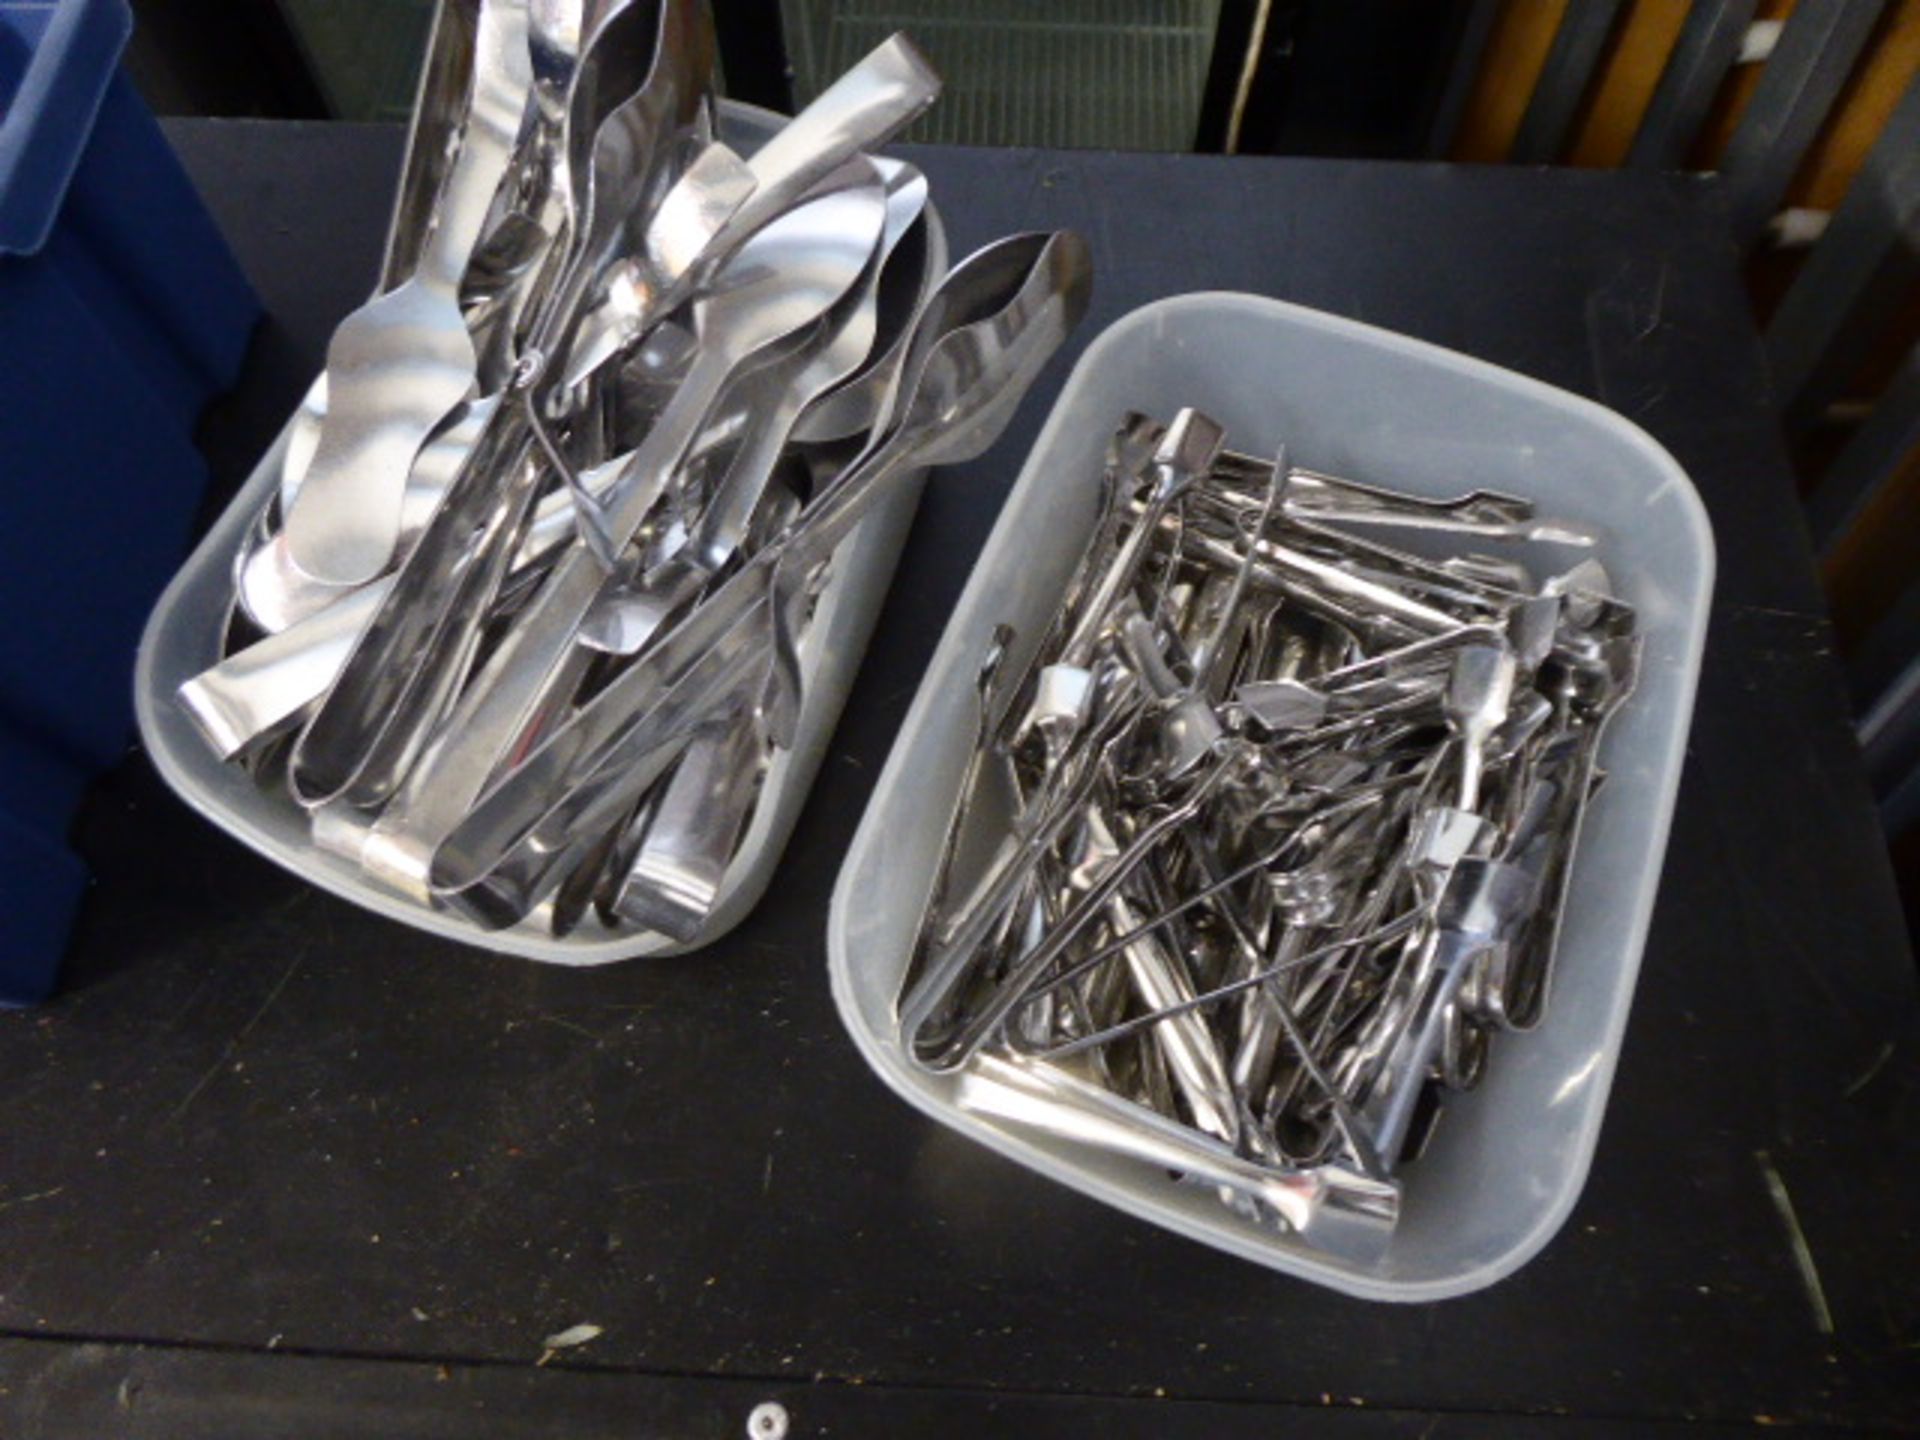 4 trays of stainless steel serving tongs, sugars and bar paraphernalia including cork screws and ice - Image 2 of 3